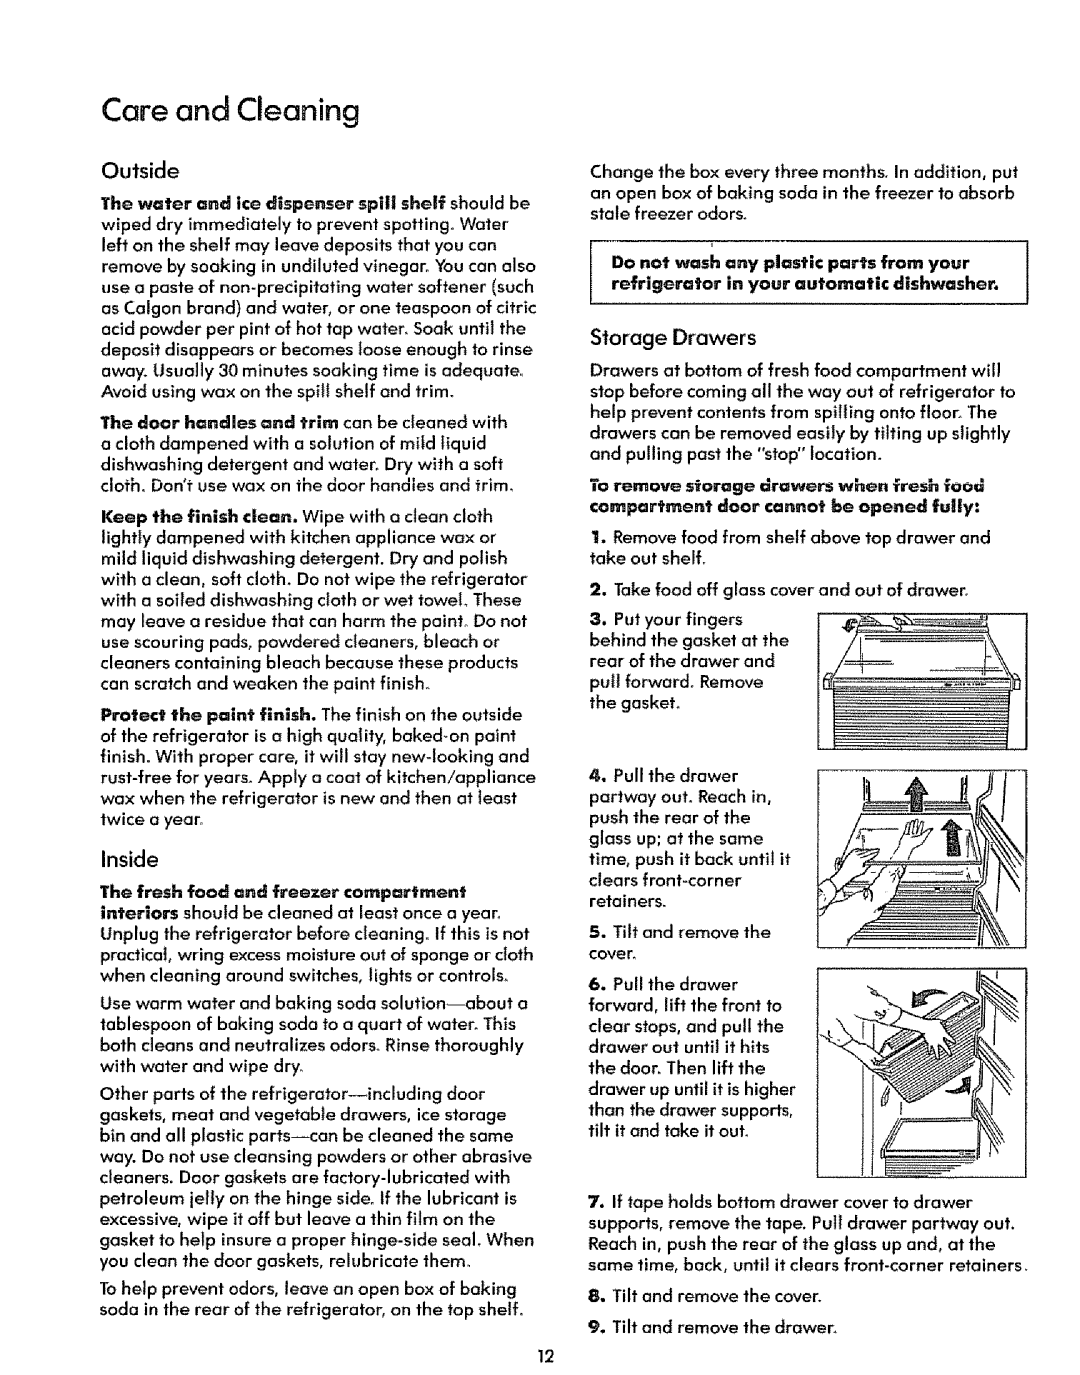 Sears 51278, 51271 manual Care and Cleaning, Inside, S orage Drawers, Oulside, refrigerator 